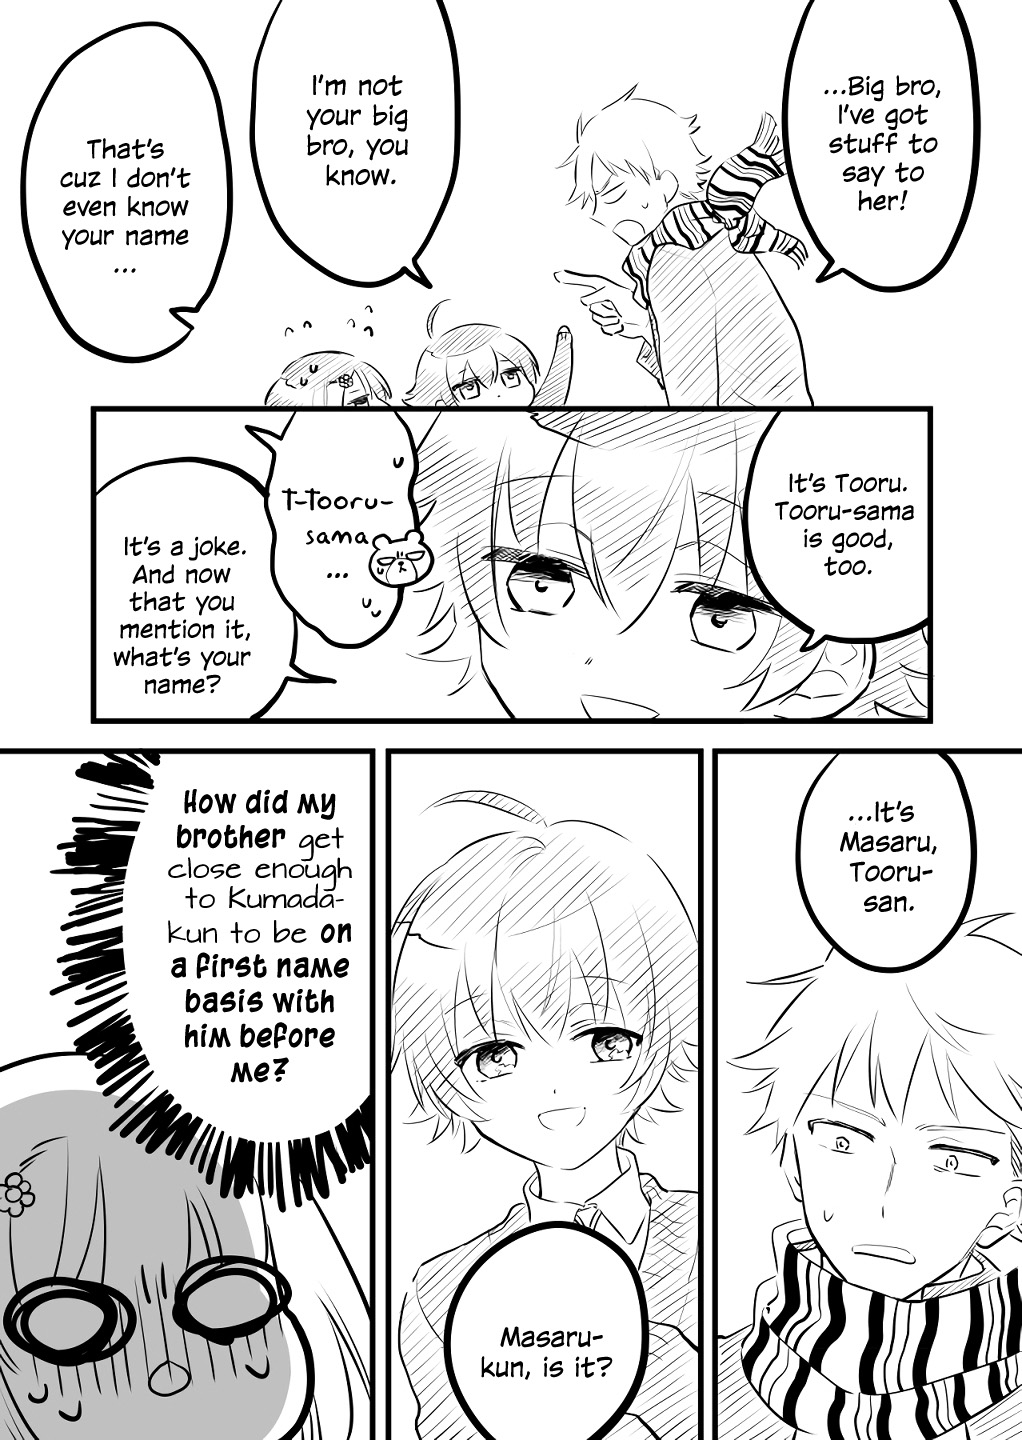 Tale Of A Girl And A Delinquent Who's Bad With Women - Page 2